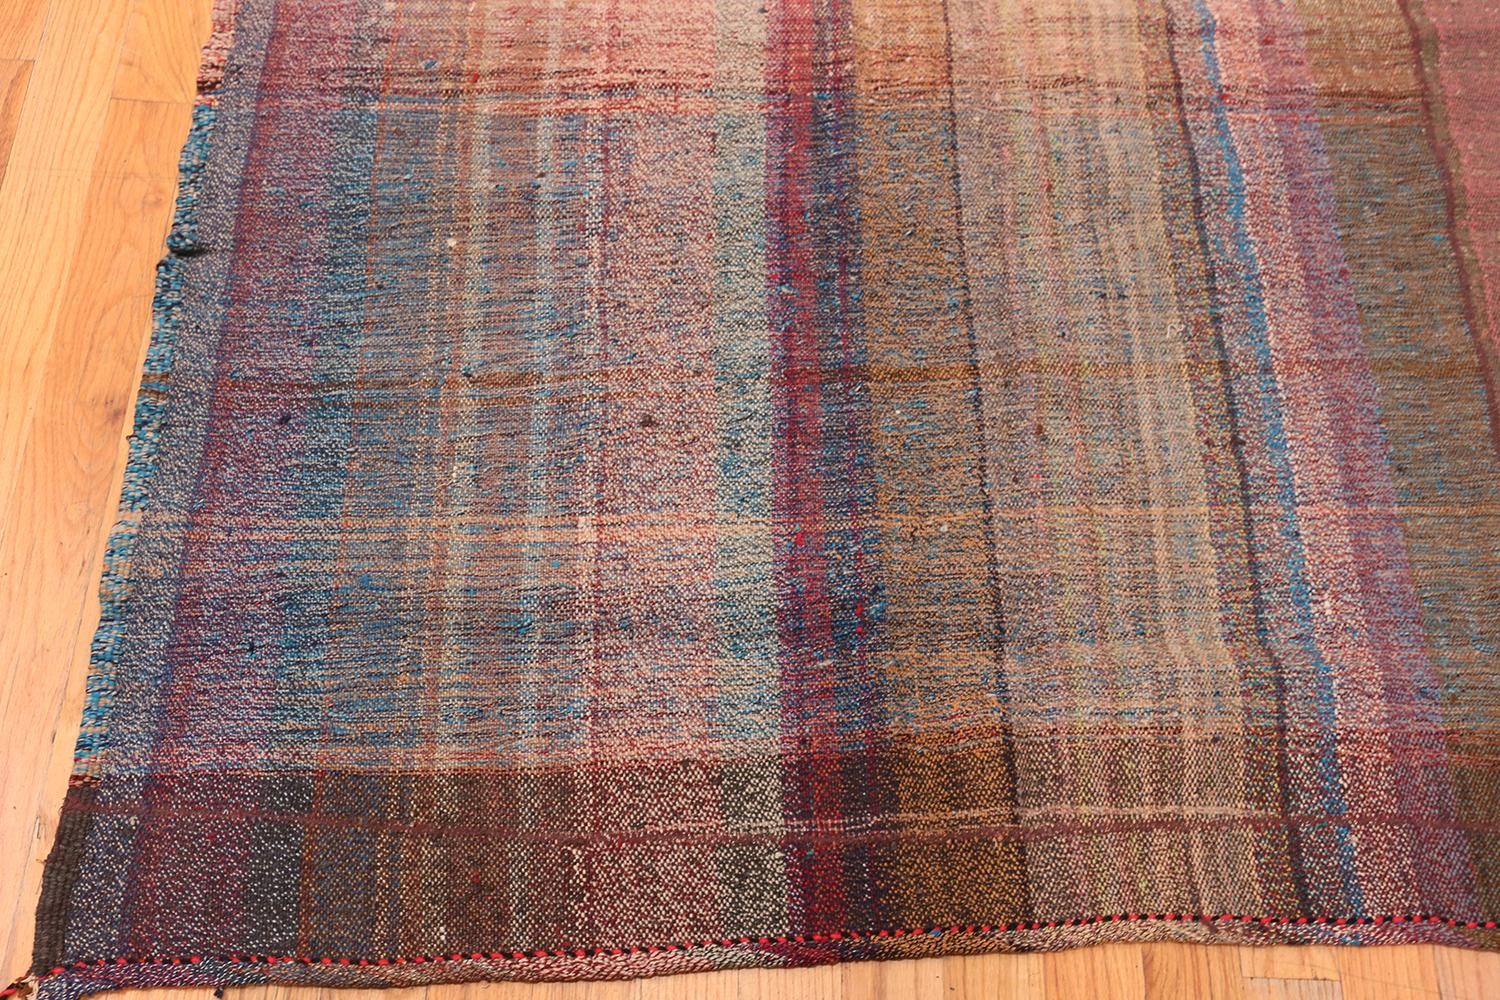 Decorative Vintage Persian Kilim Rug. 8 ft 4 in x 11 ft 5 in In Good Condition For Sale In New York, NY